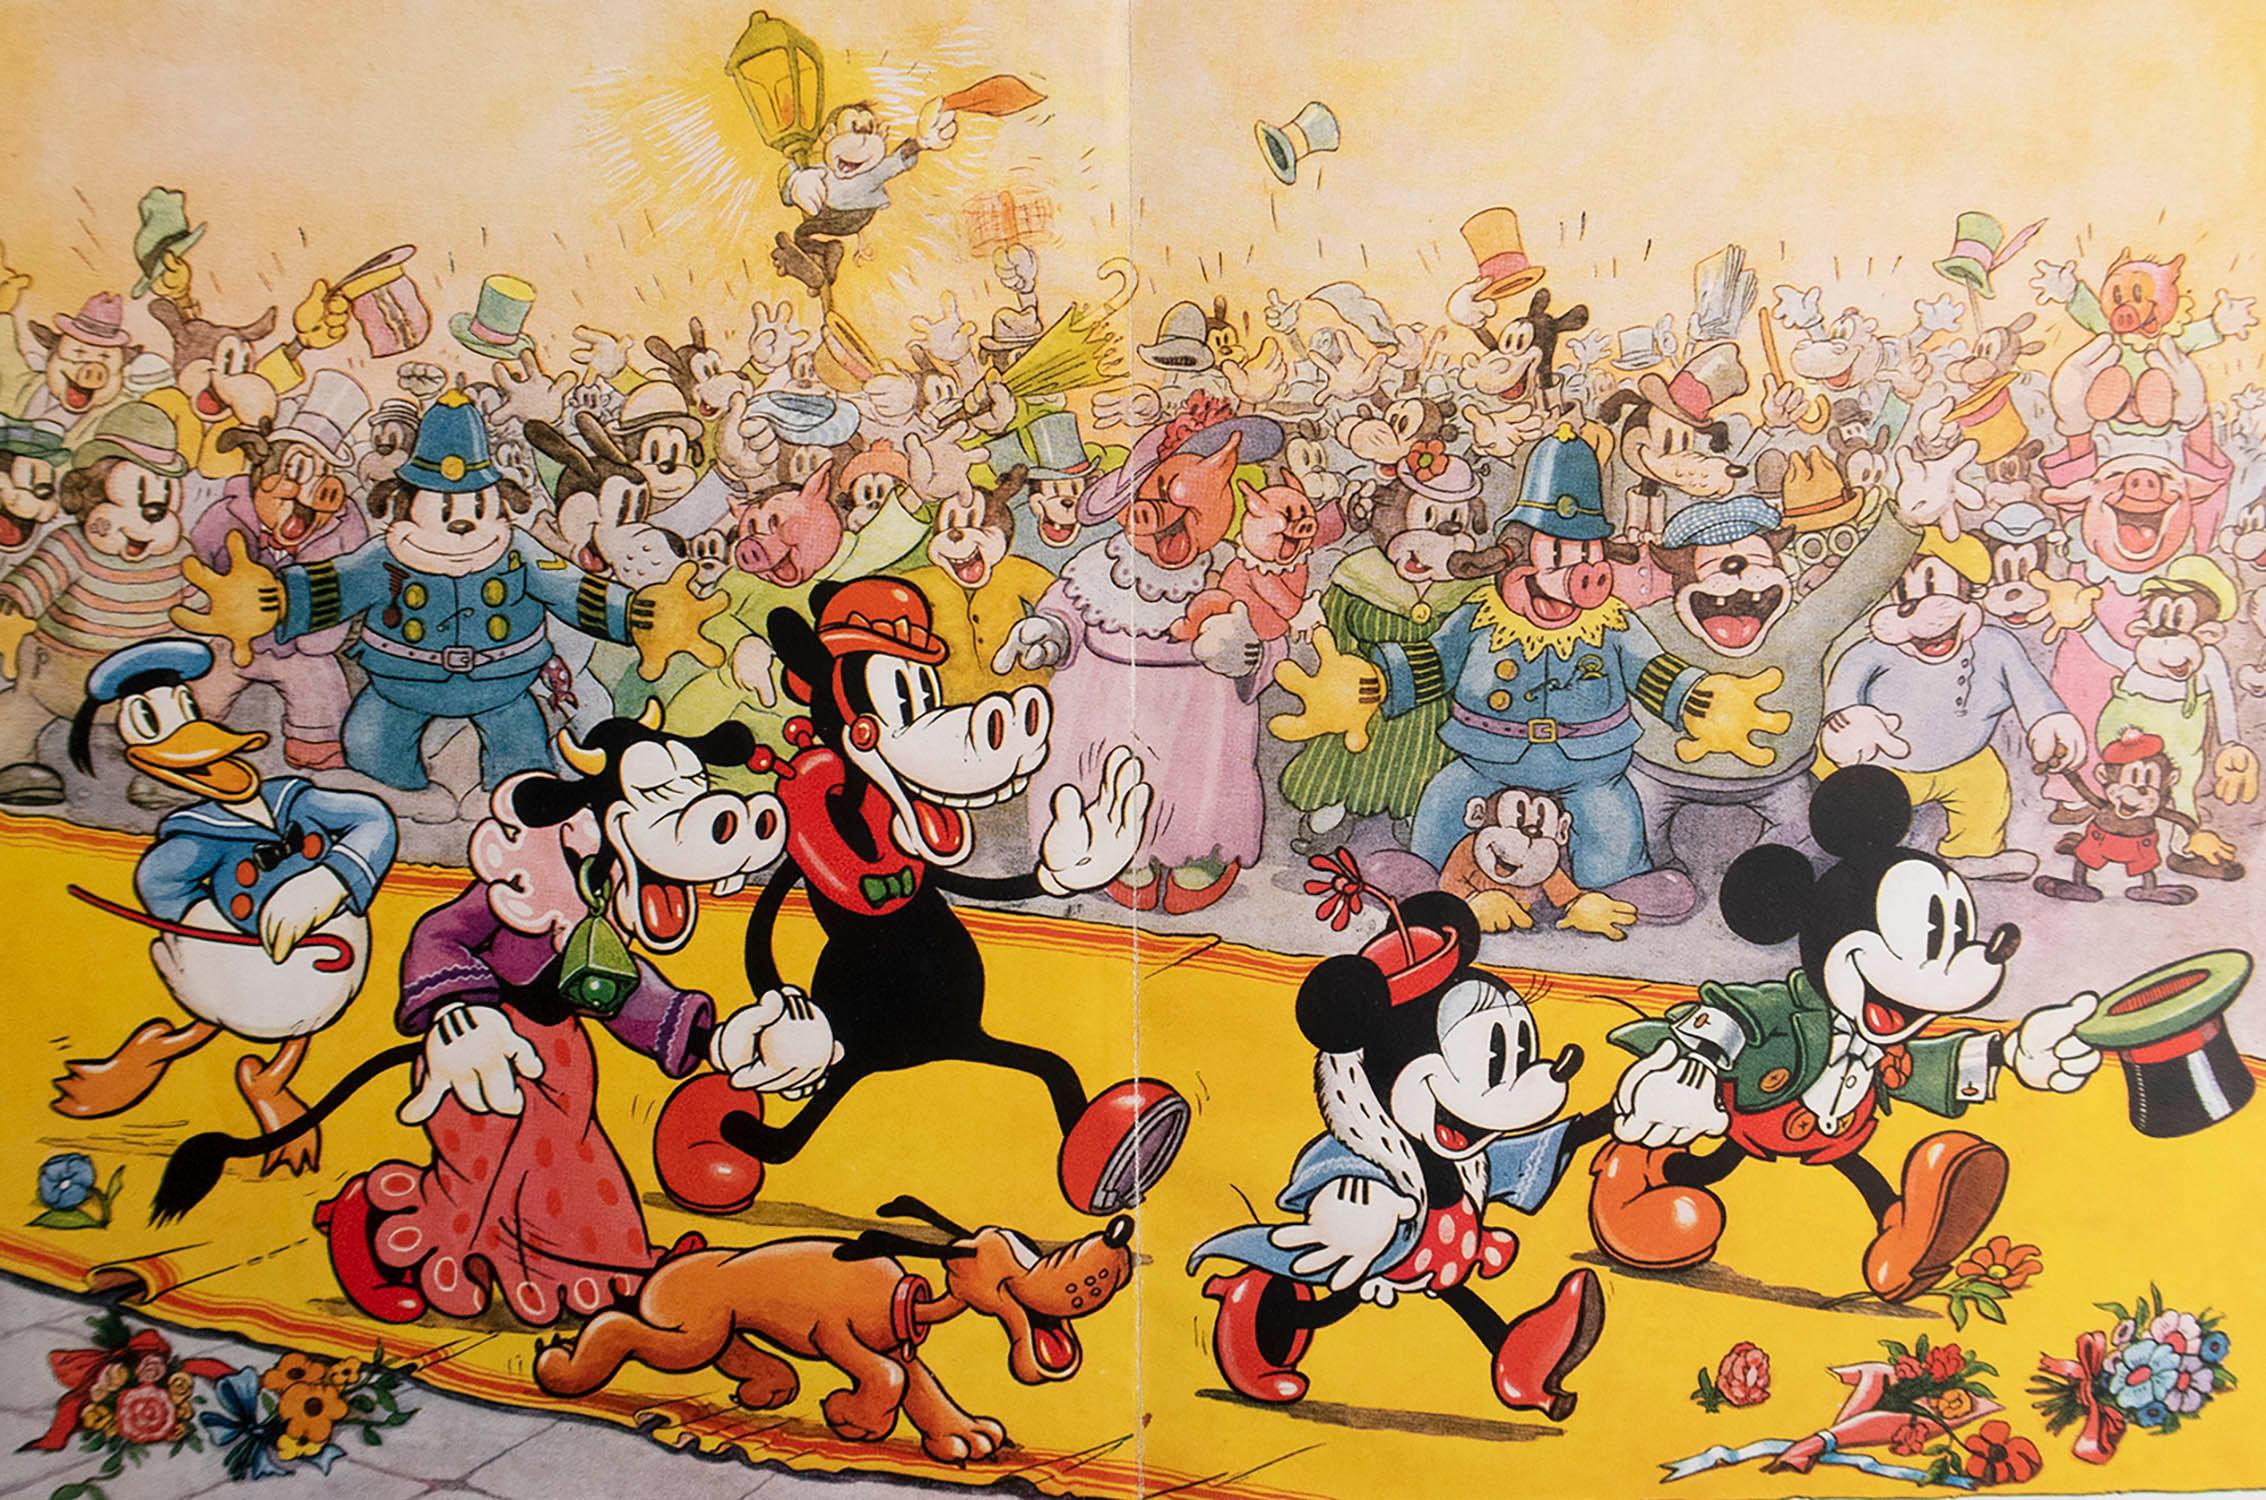 Super image of Mickey Mouse arriving to a party

Published 1930's

The measurement given is the paper size not the actual image.

